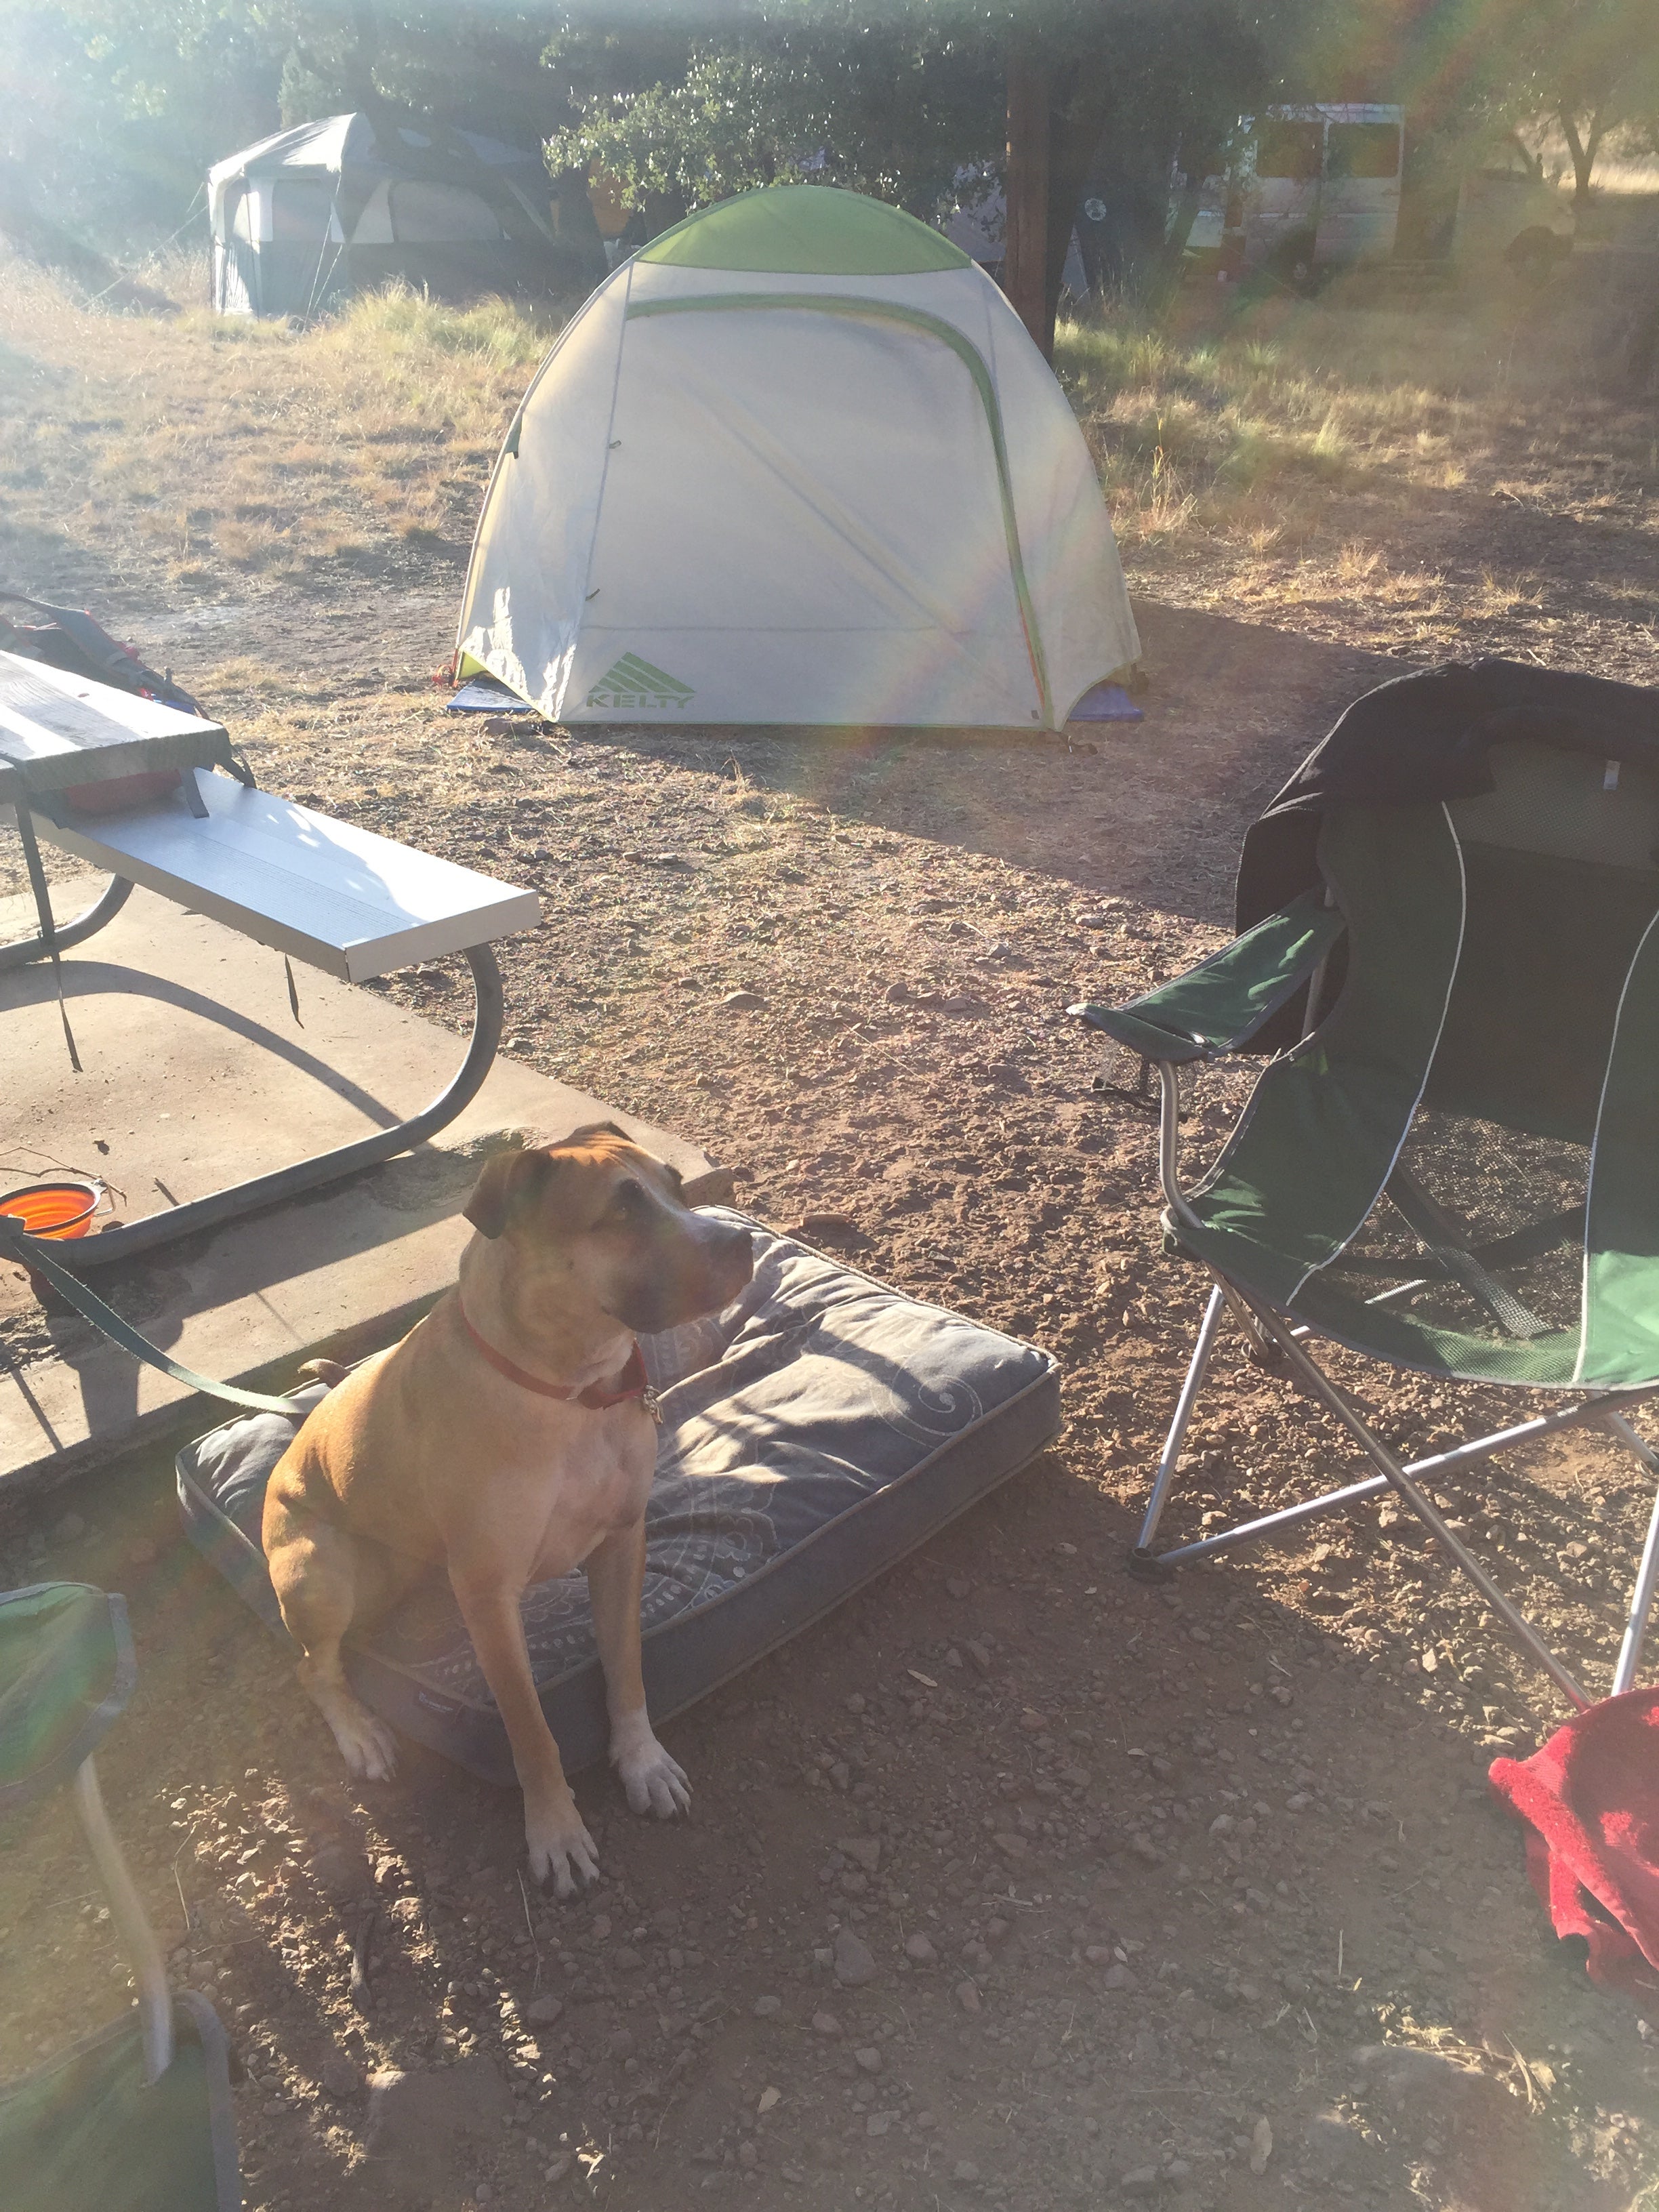 Hanging out at the campsite after a day of hiking & exploring. 